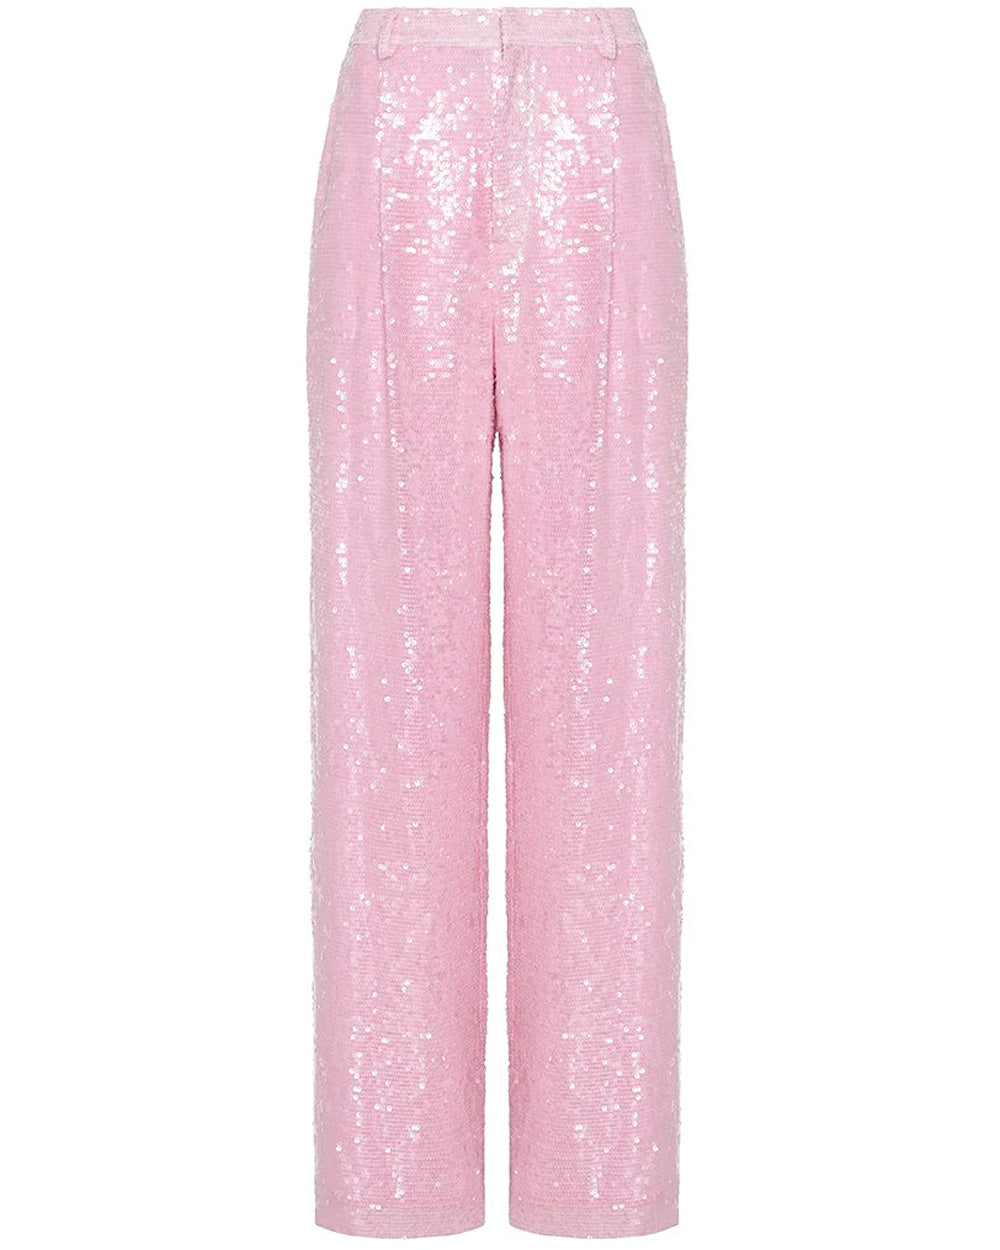 Blossom Sequin Relaxed Pleat Pant